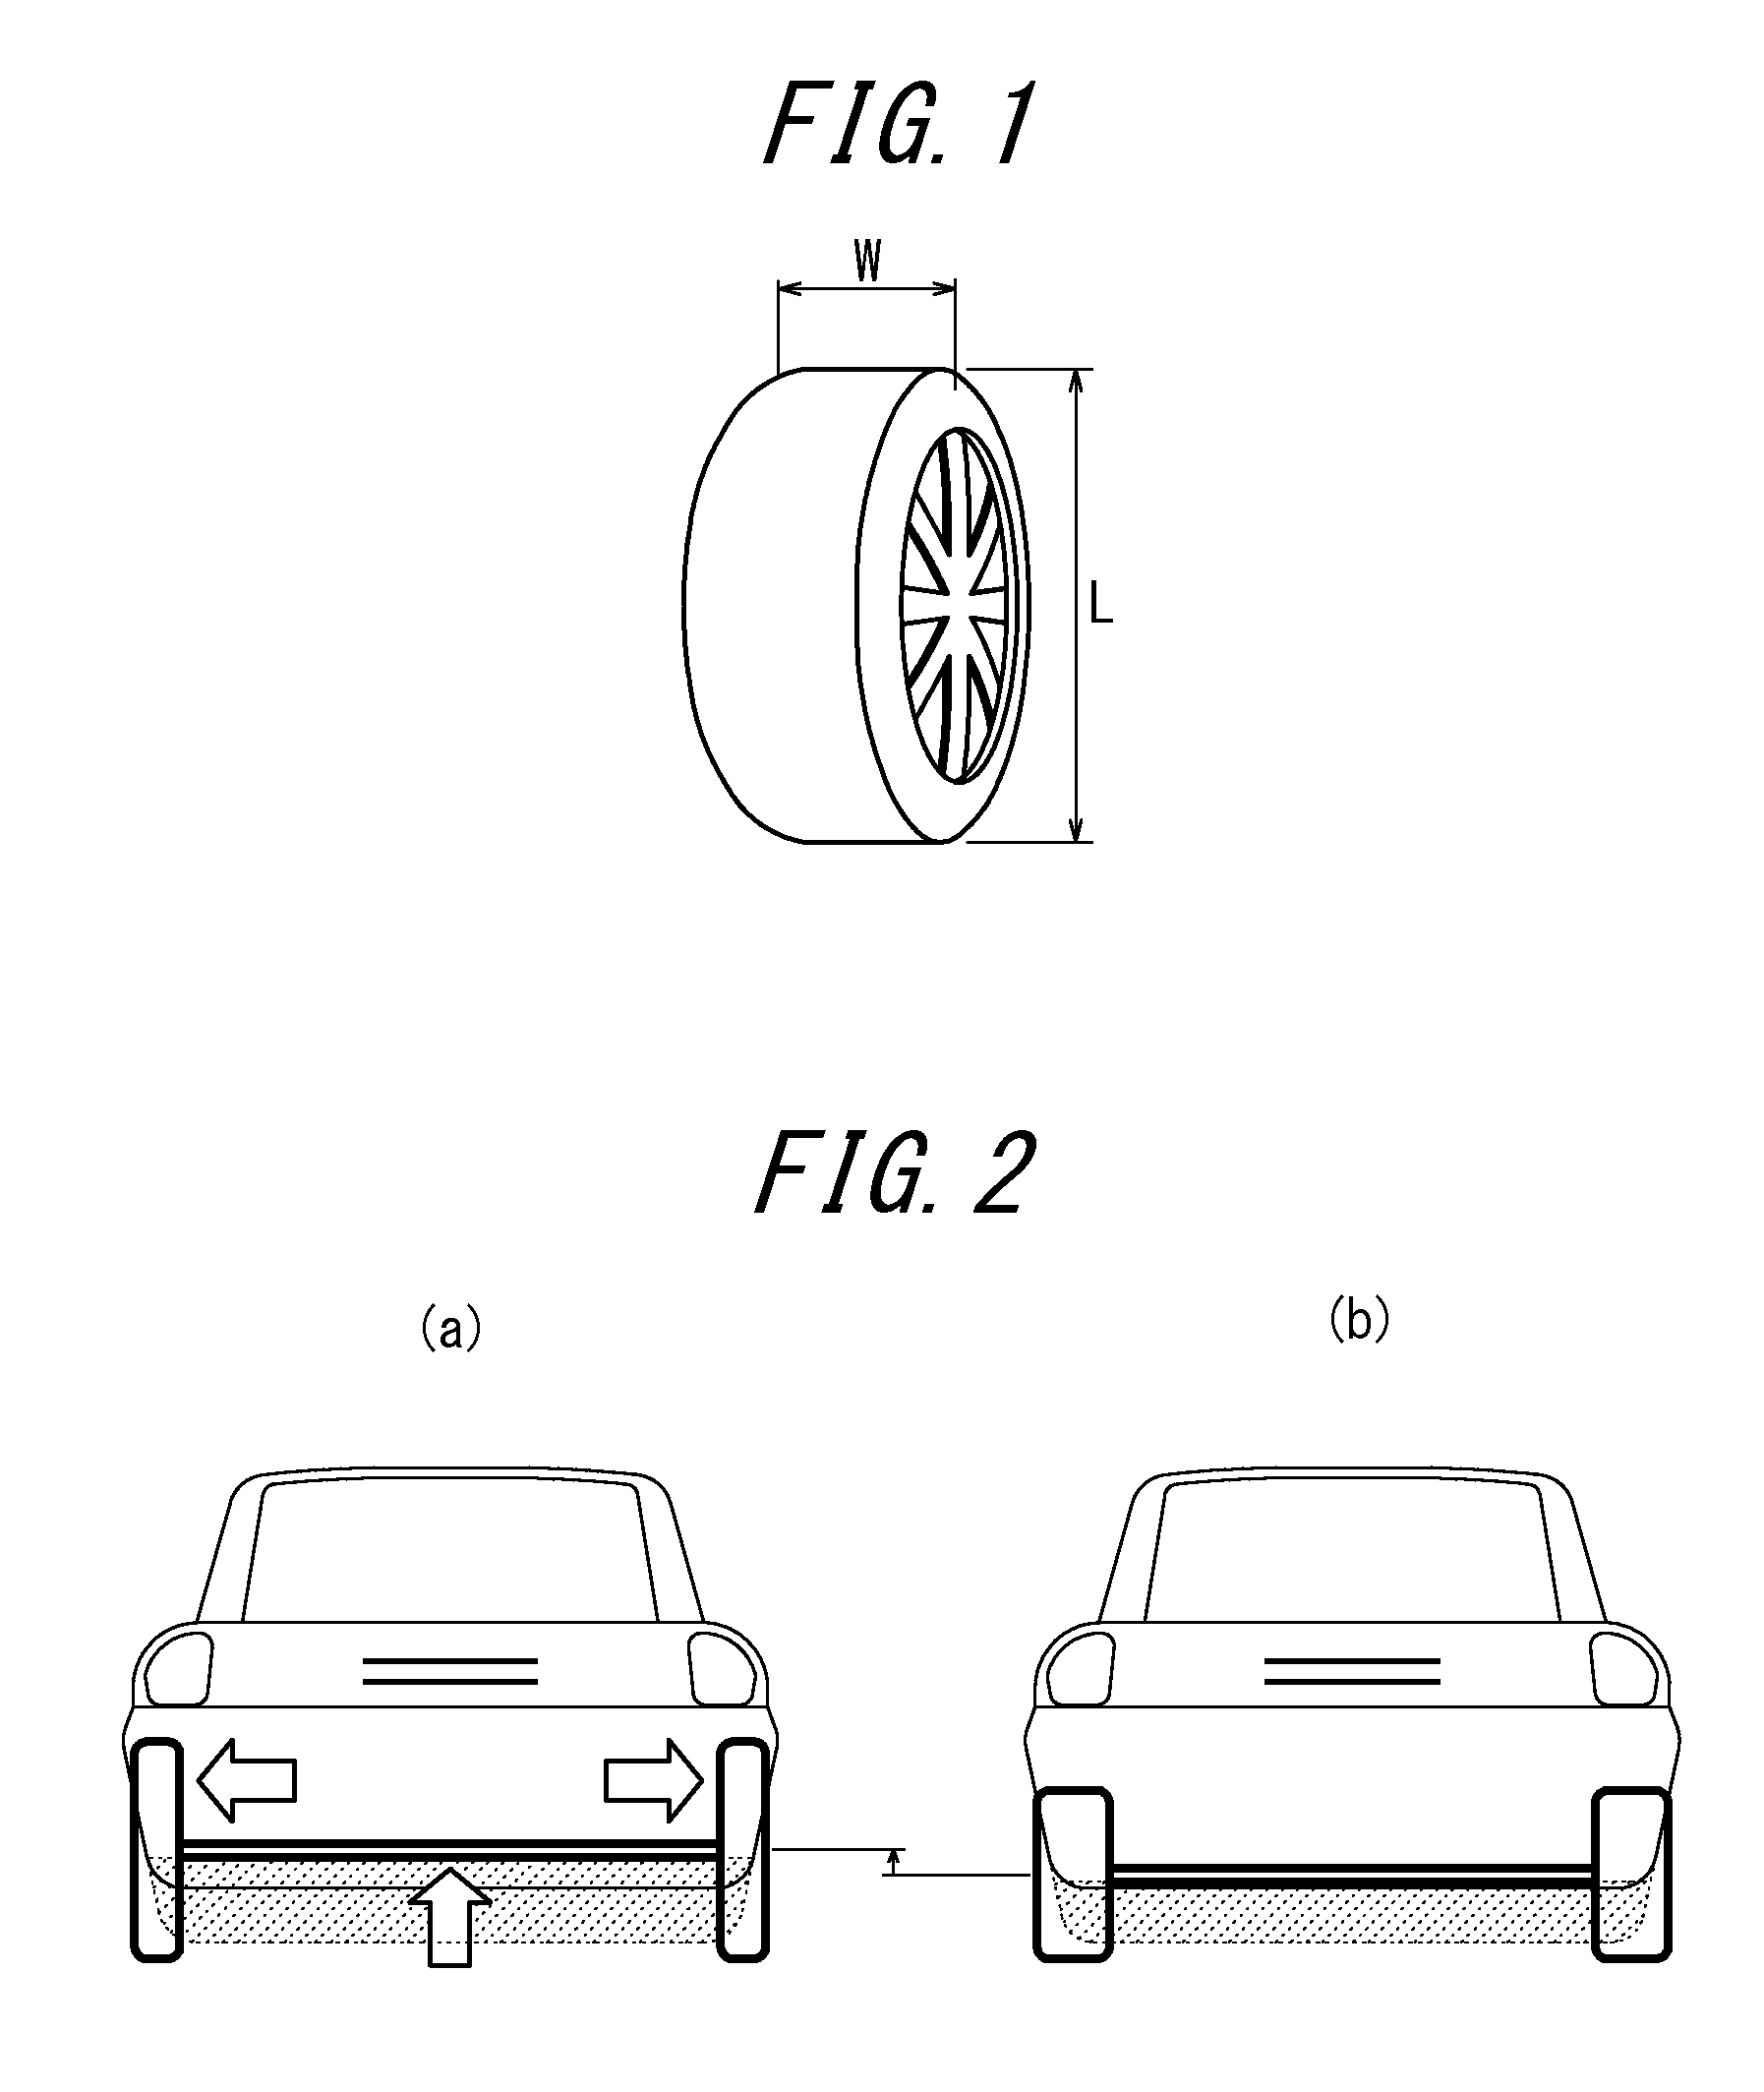 Pneumatic radial tire for a passenger vehicle